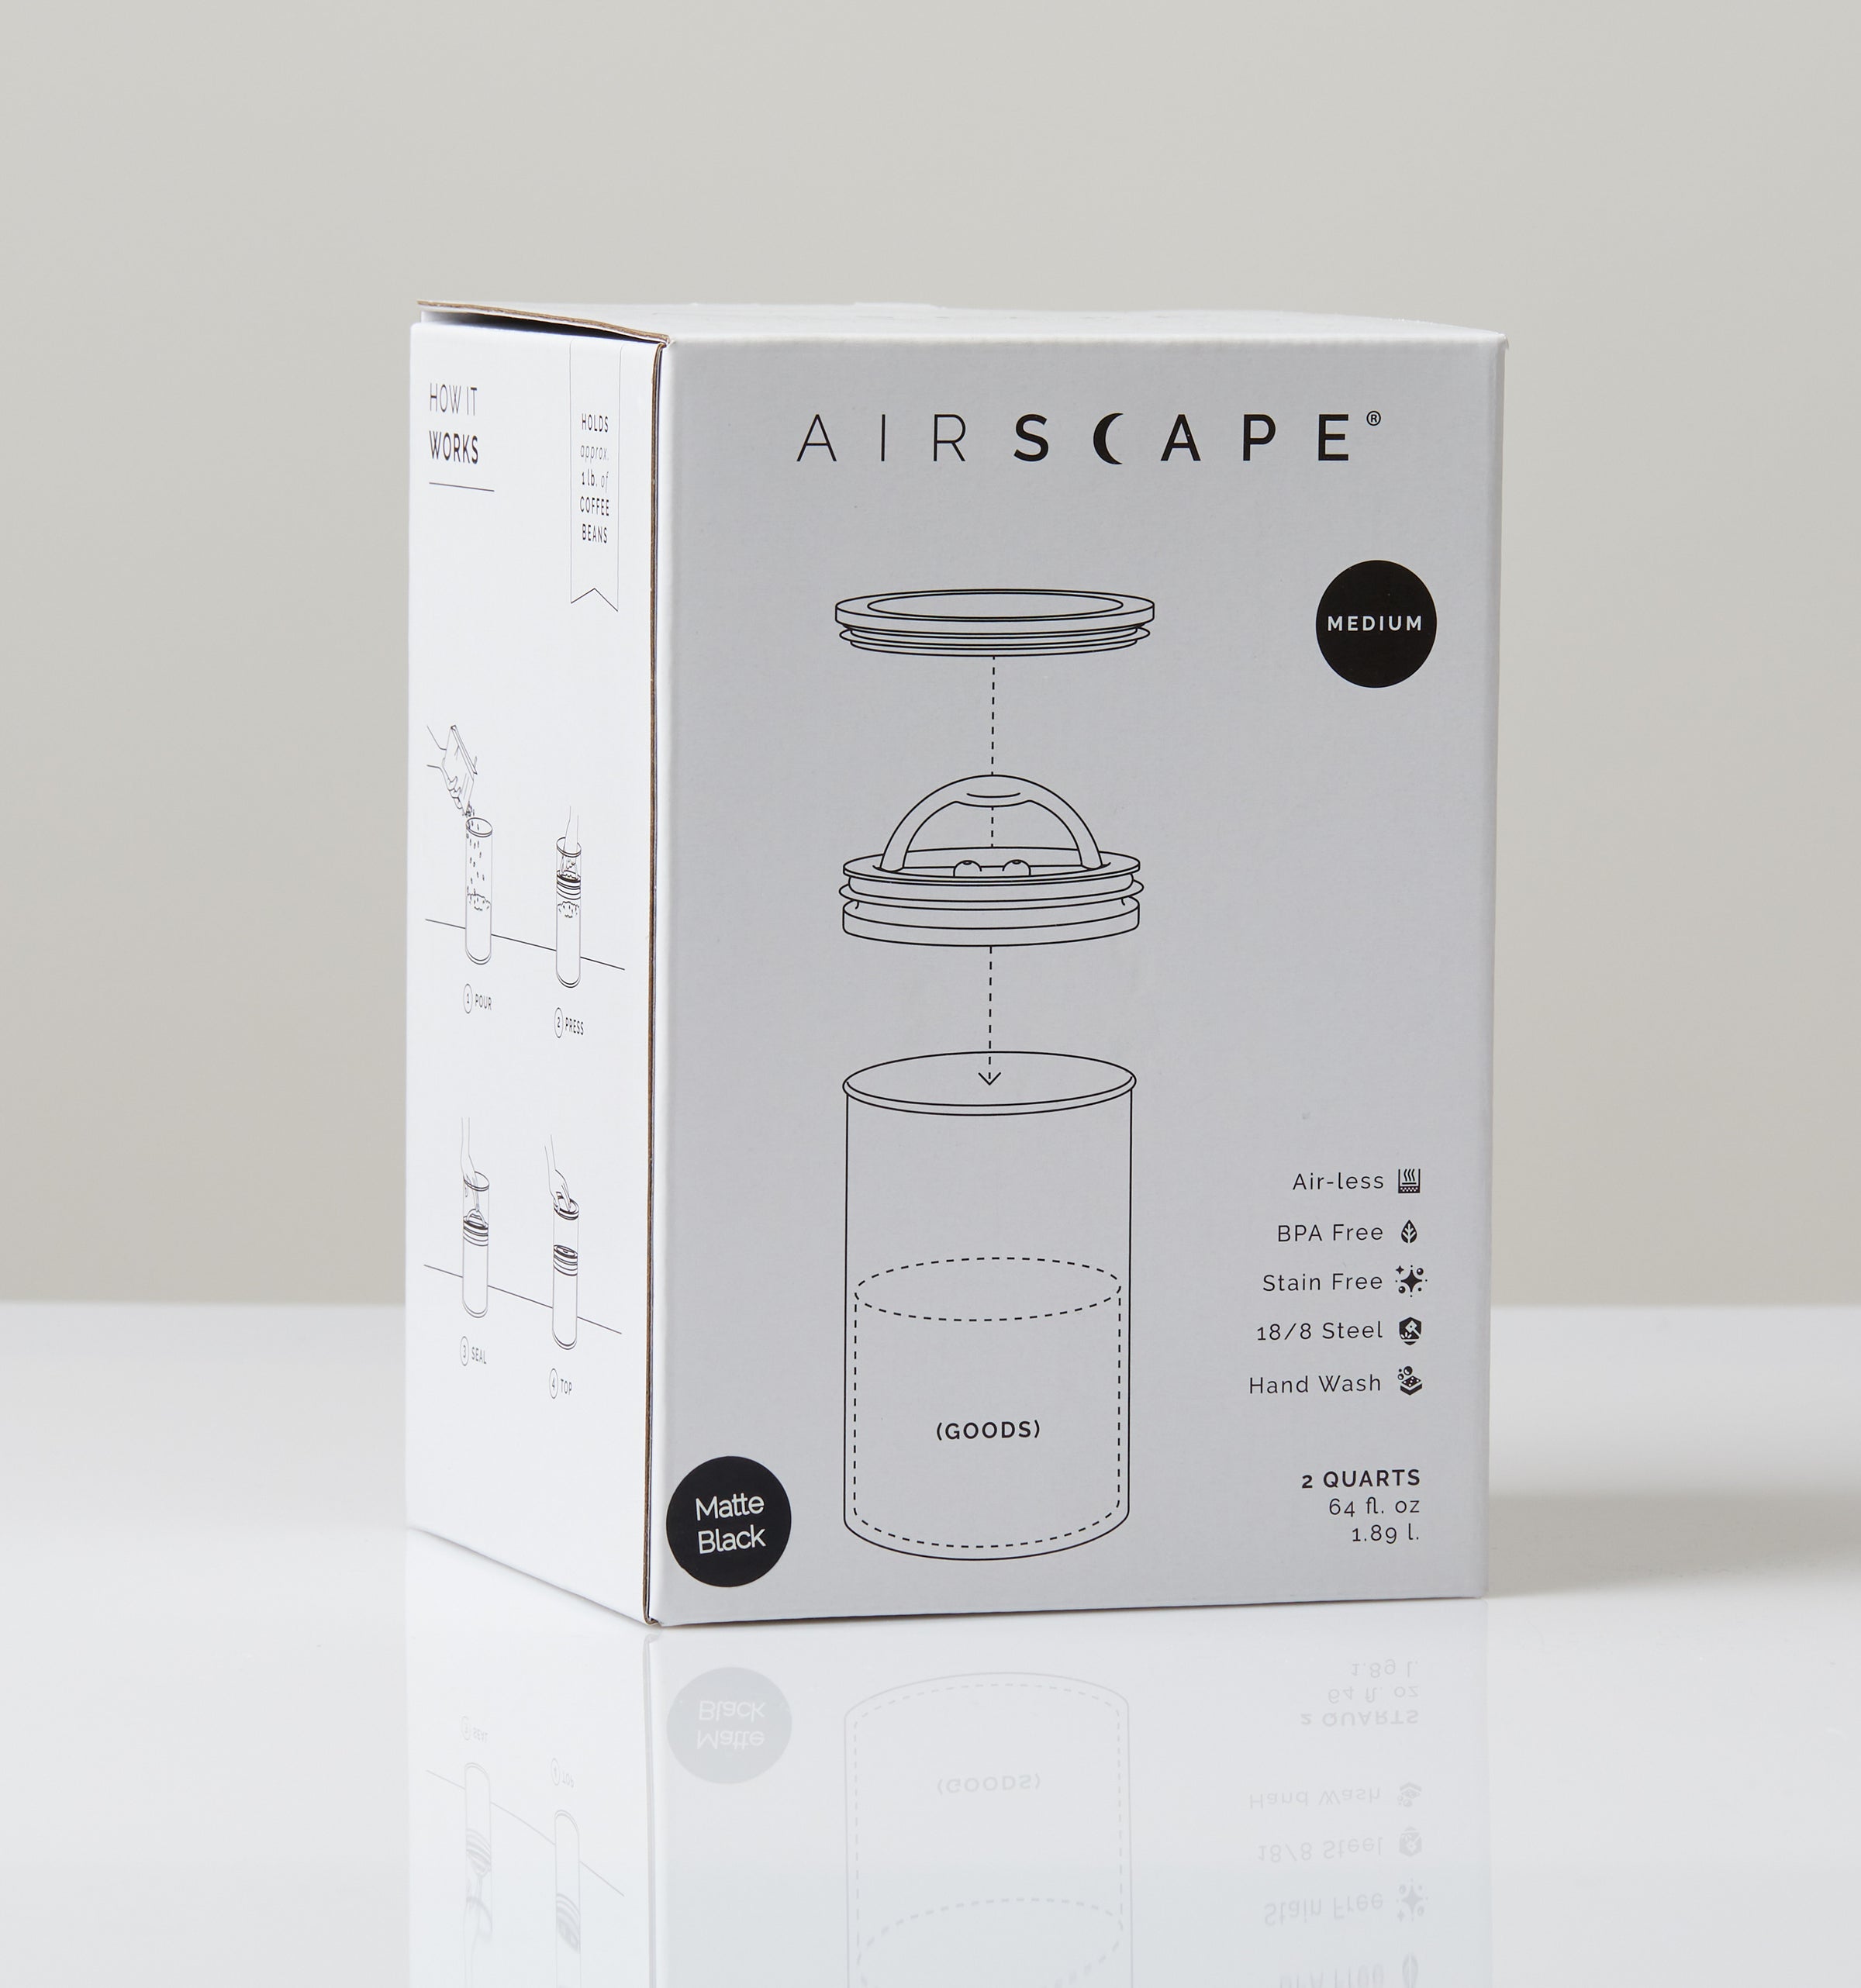 Airscape Airtight Bean Storage System I Mudhouse Coffee Roasters